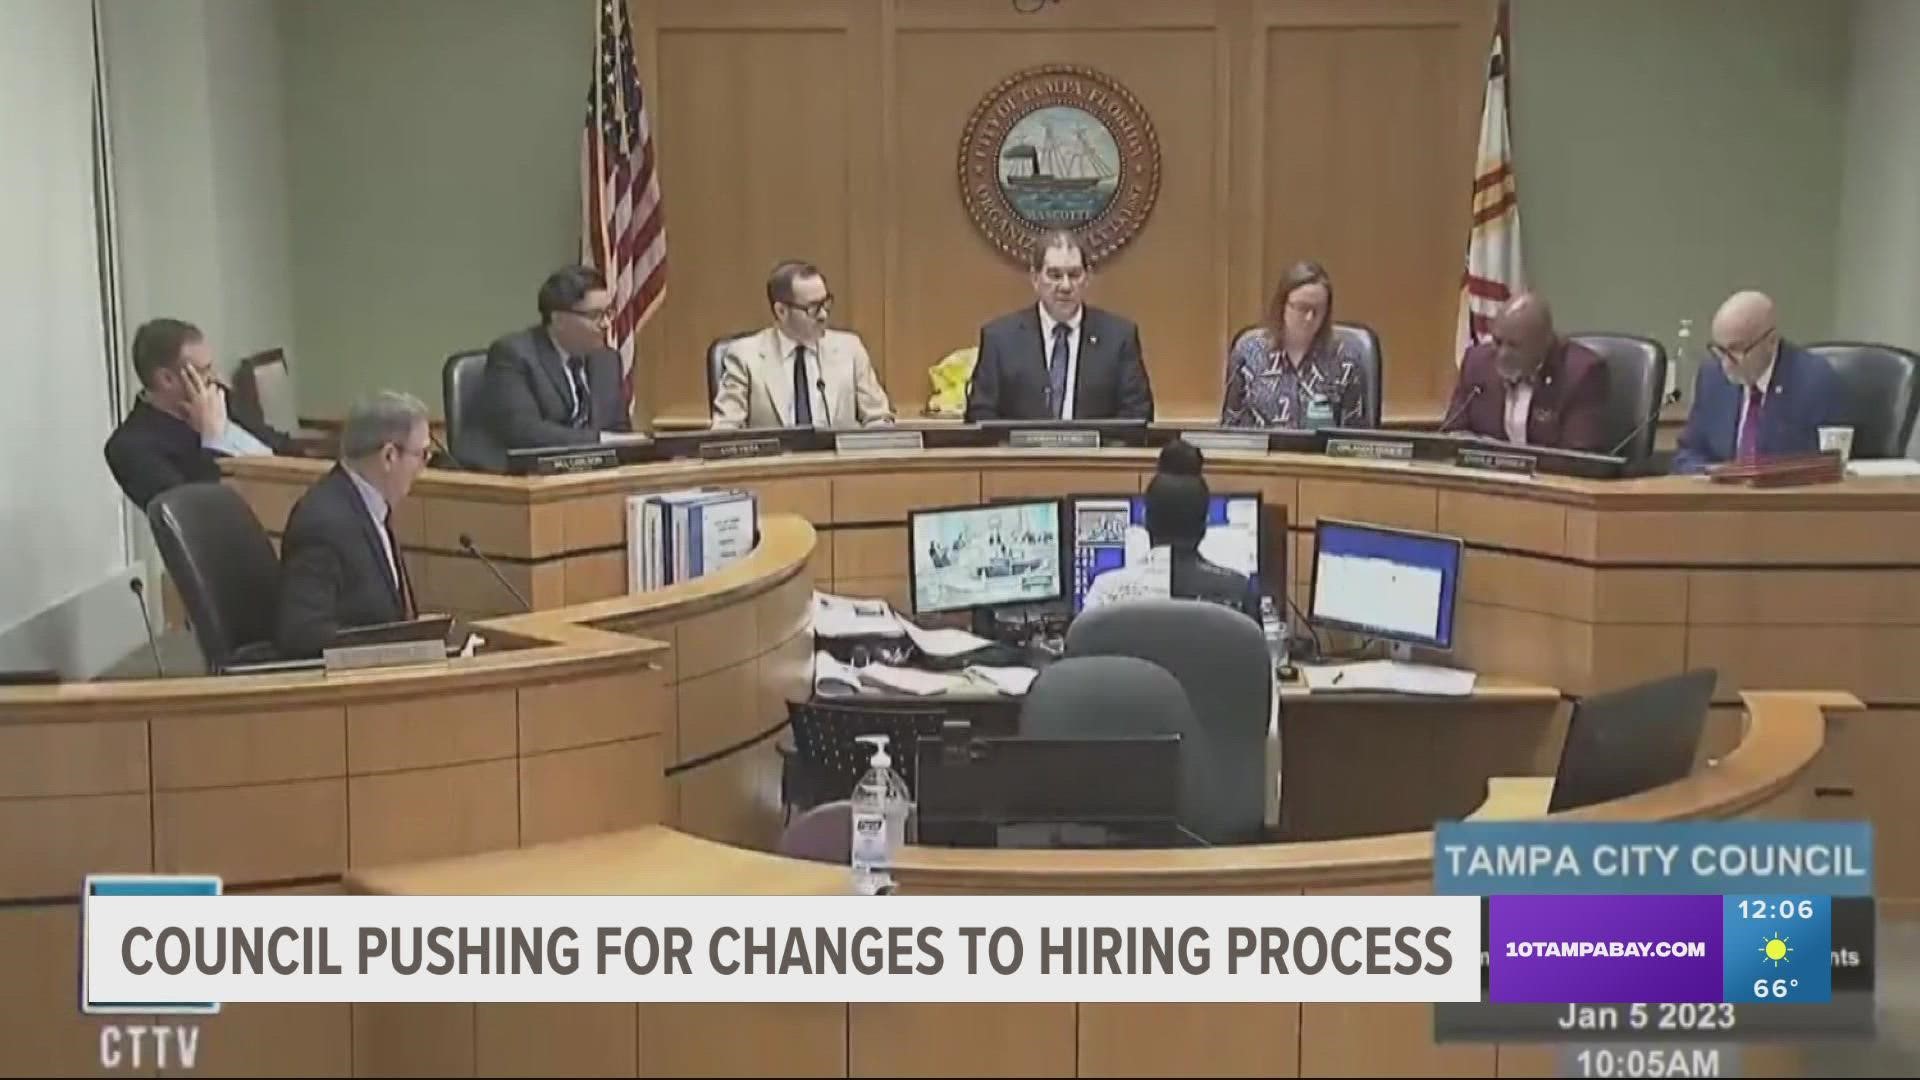 In Tampa, city council members want to make it clear they have the finial say for any department head hires moving forward.